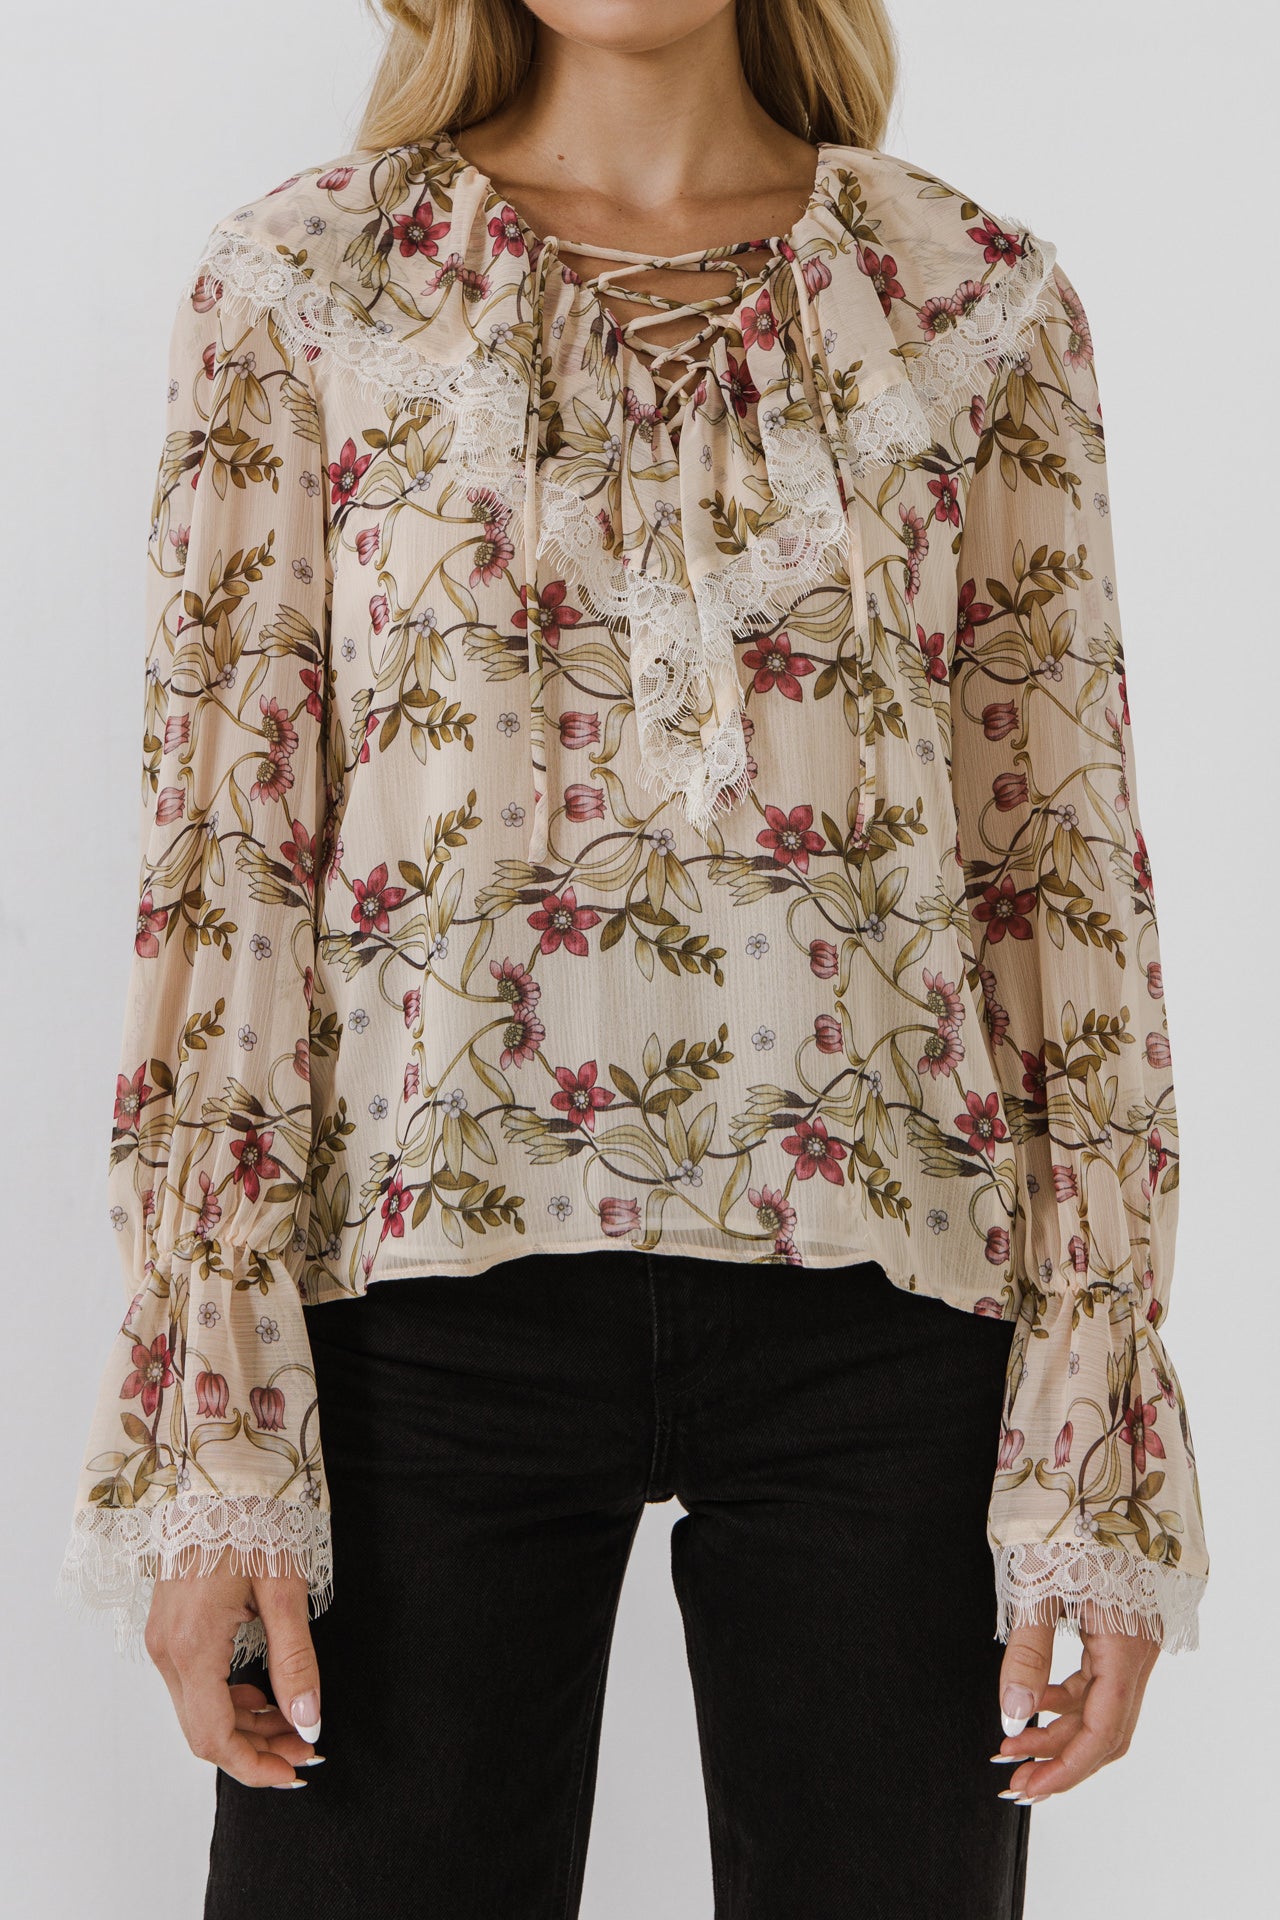 Endless Rose - Heart Vine Lace Up Blouse - Shirts & blouses in Women's Clothing available at endlessrose.com